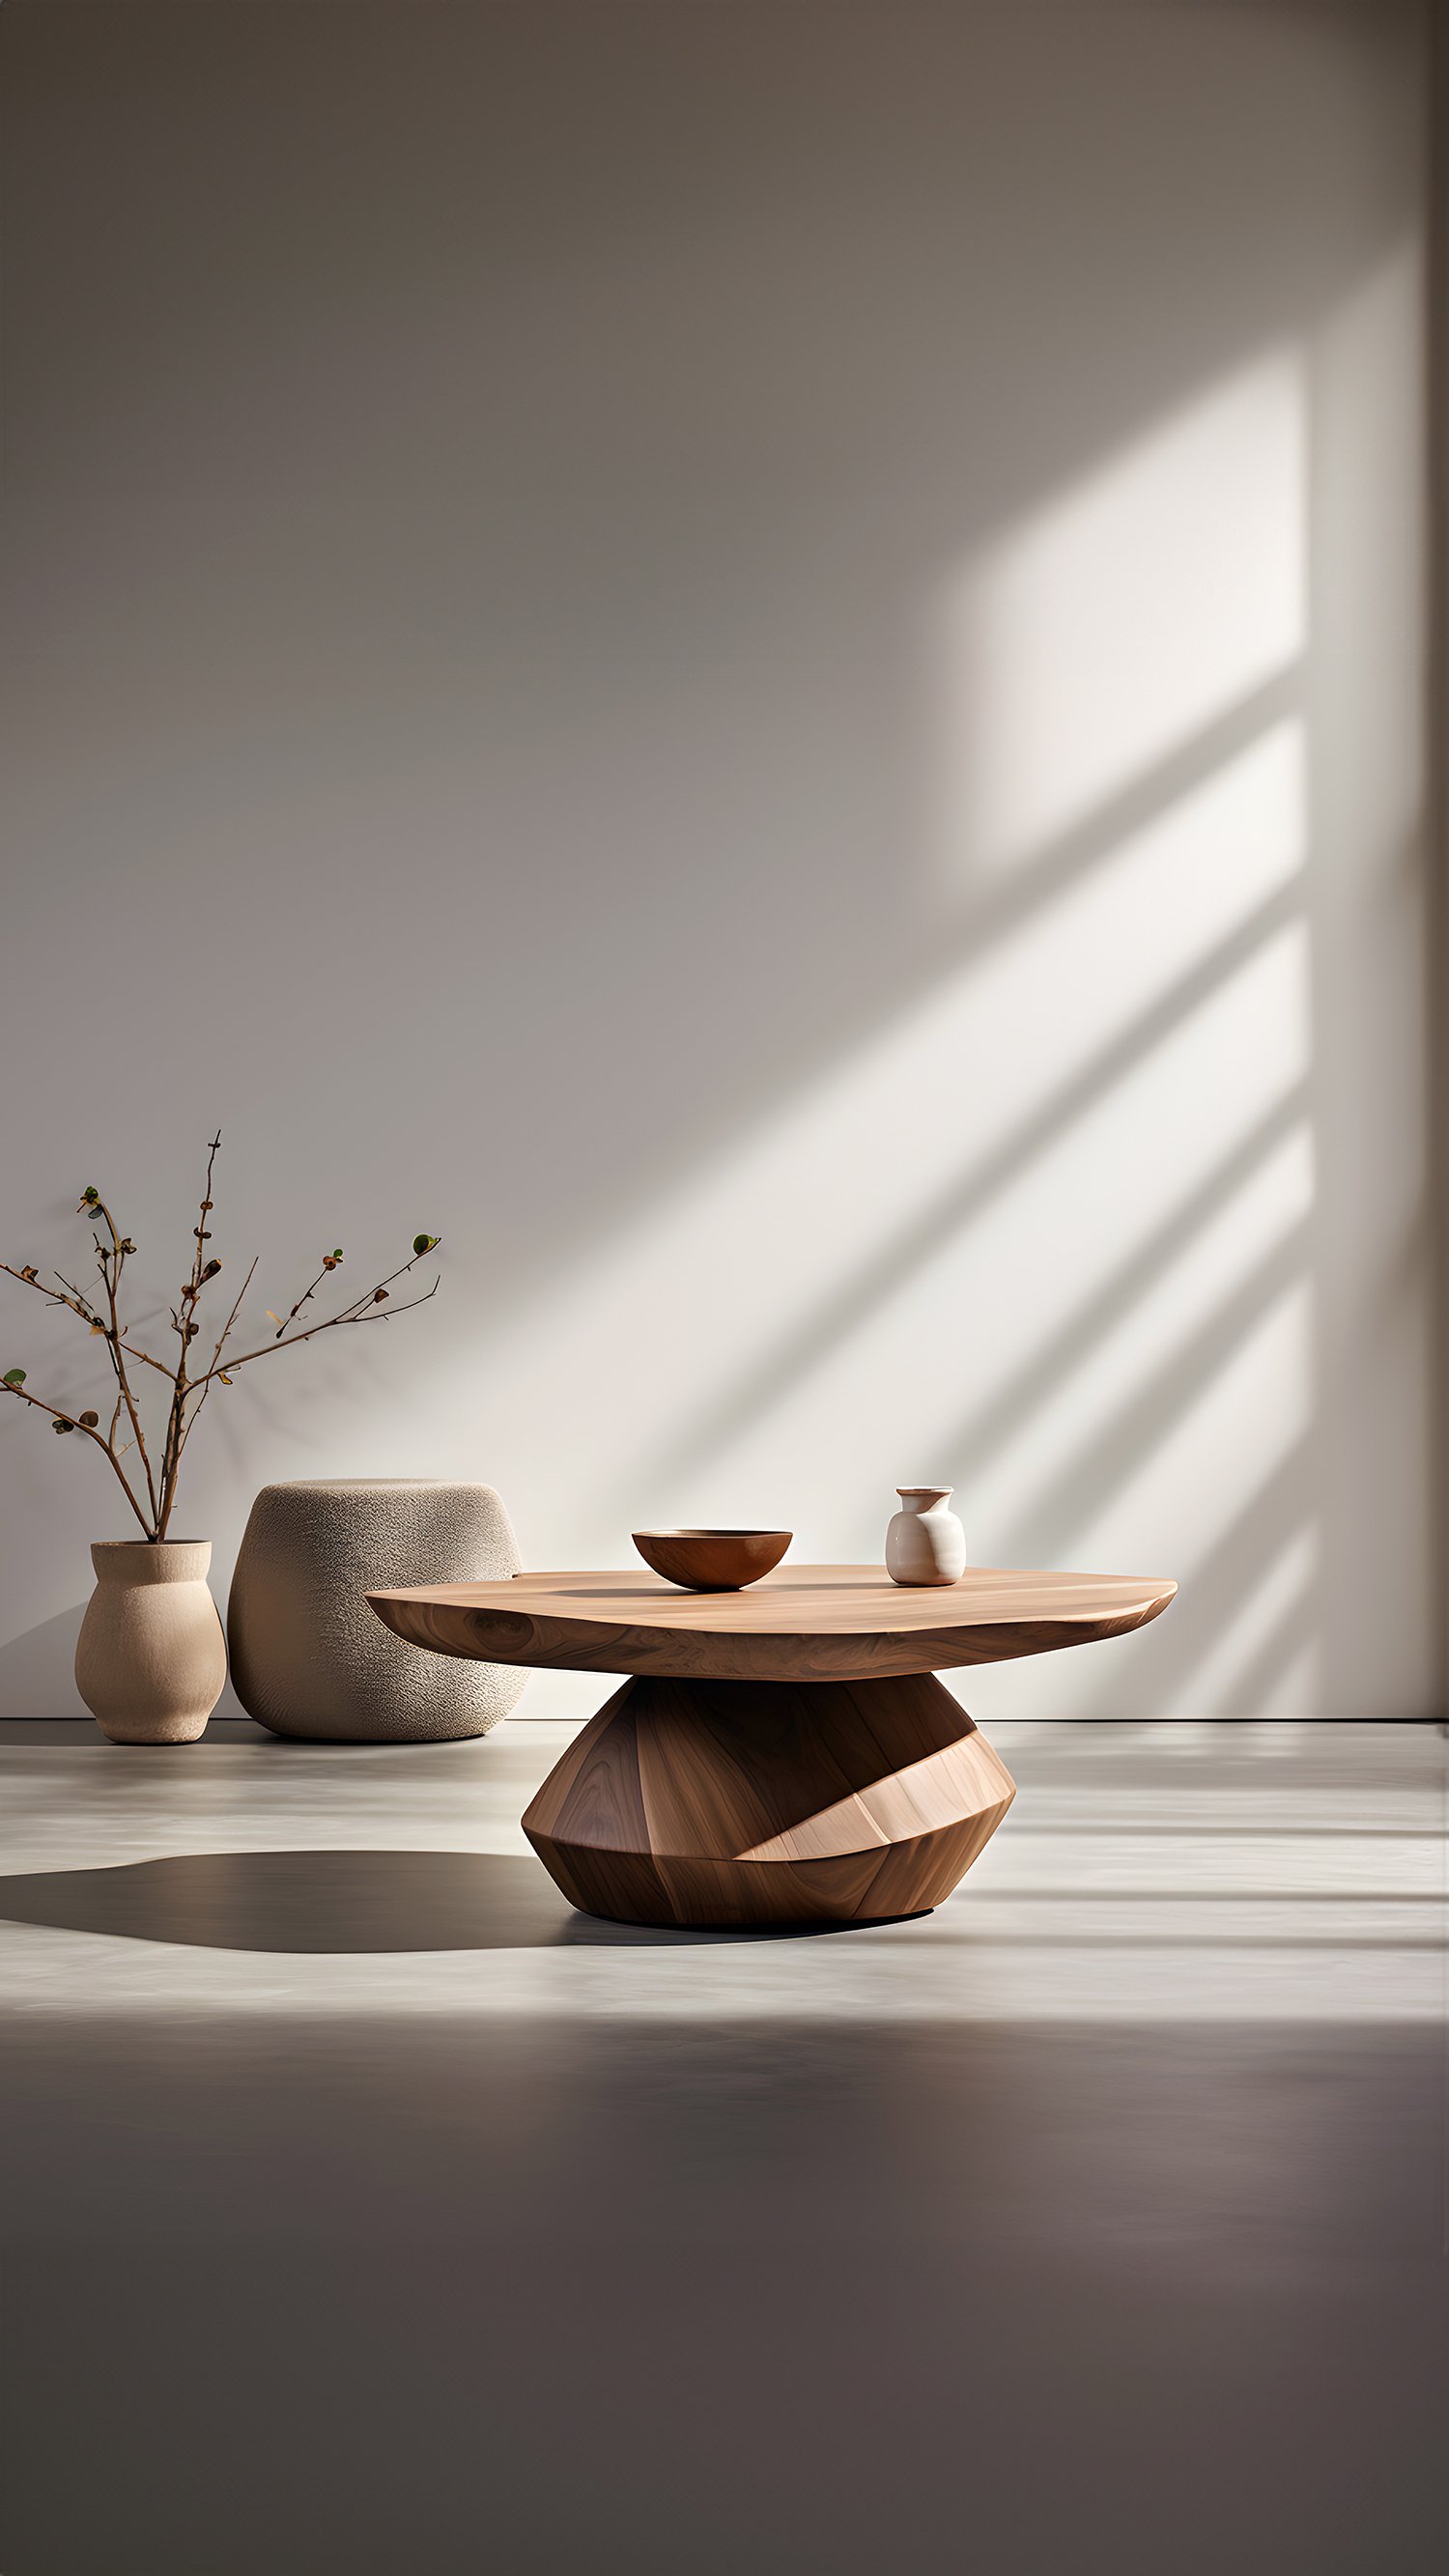 Sculptural Coffee Table Made of Solid Wood, Center Table Solace S33 by Joel Escalona — 9.jpg